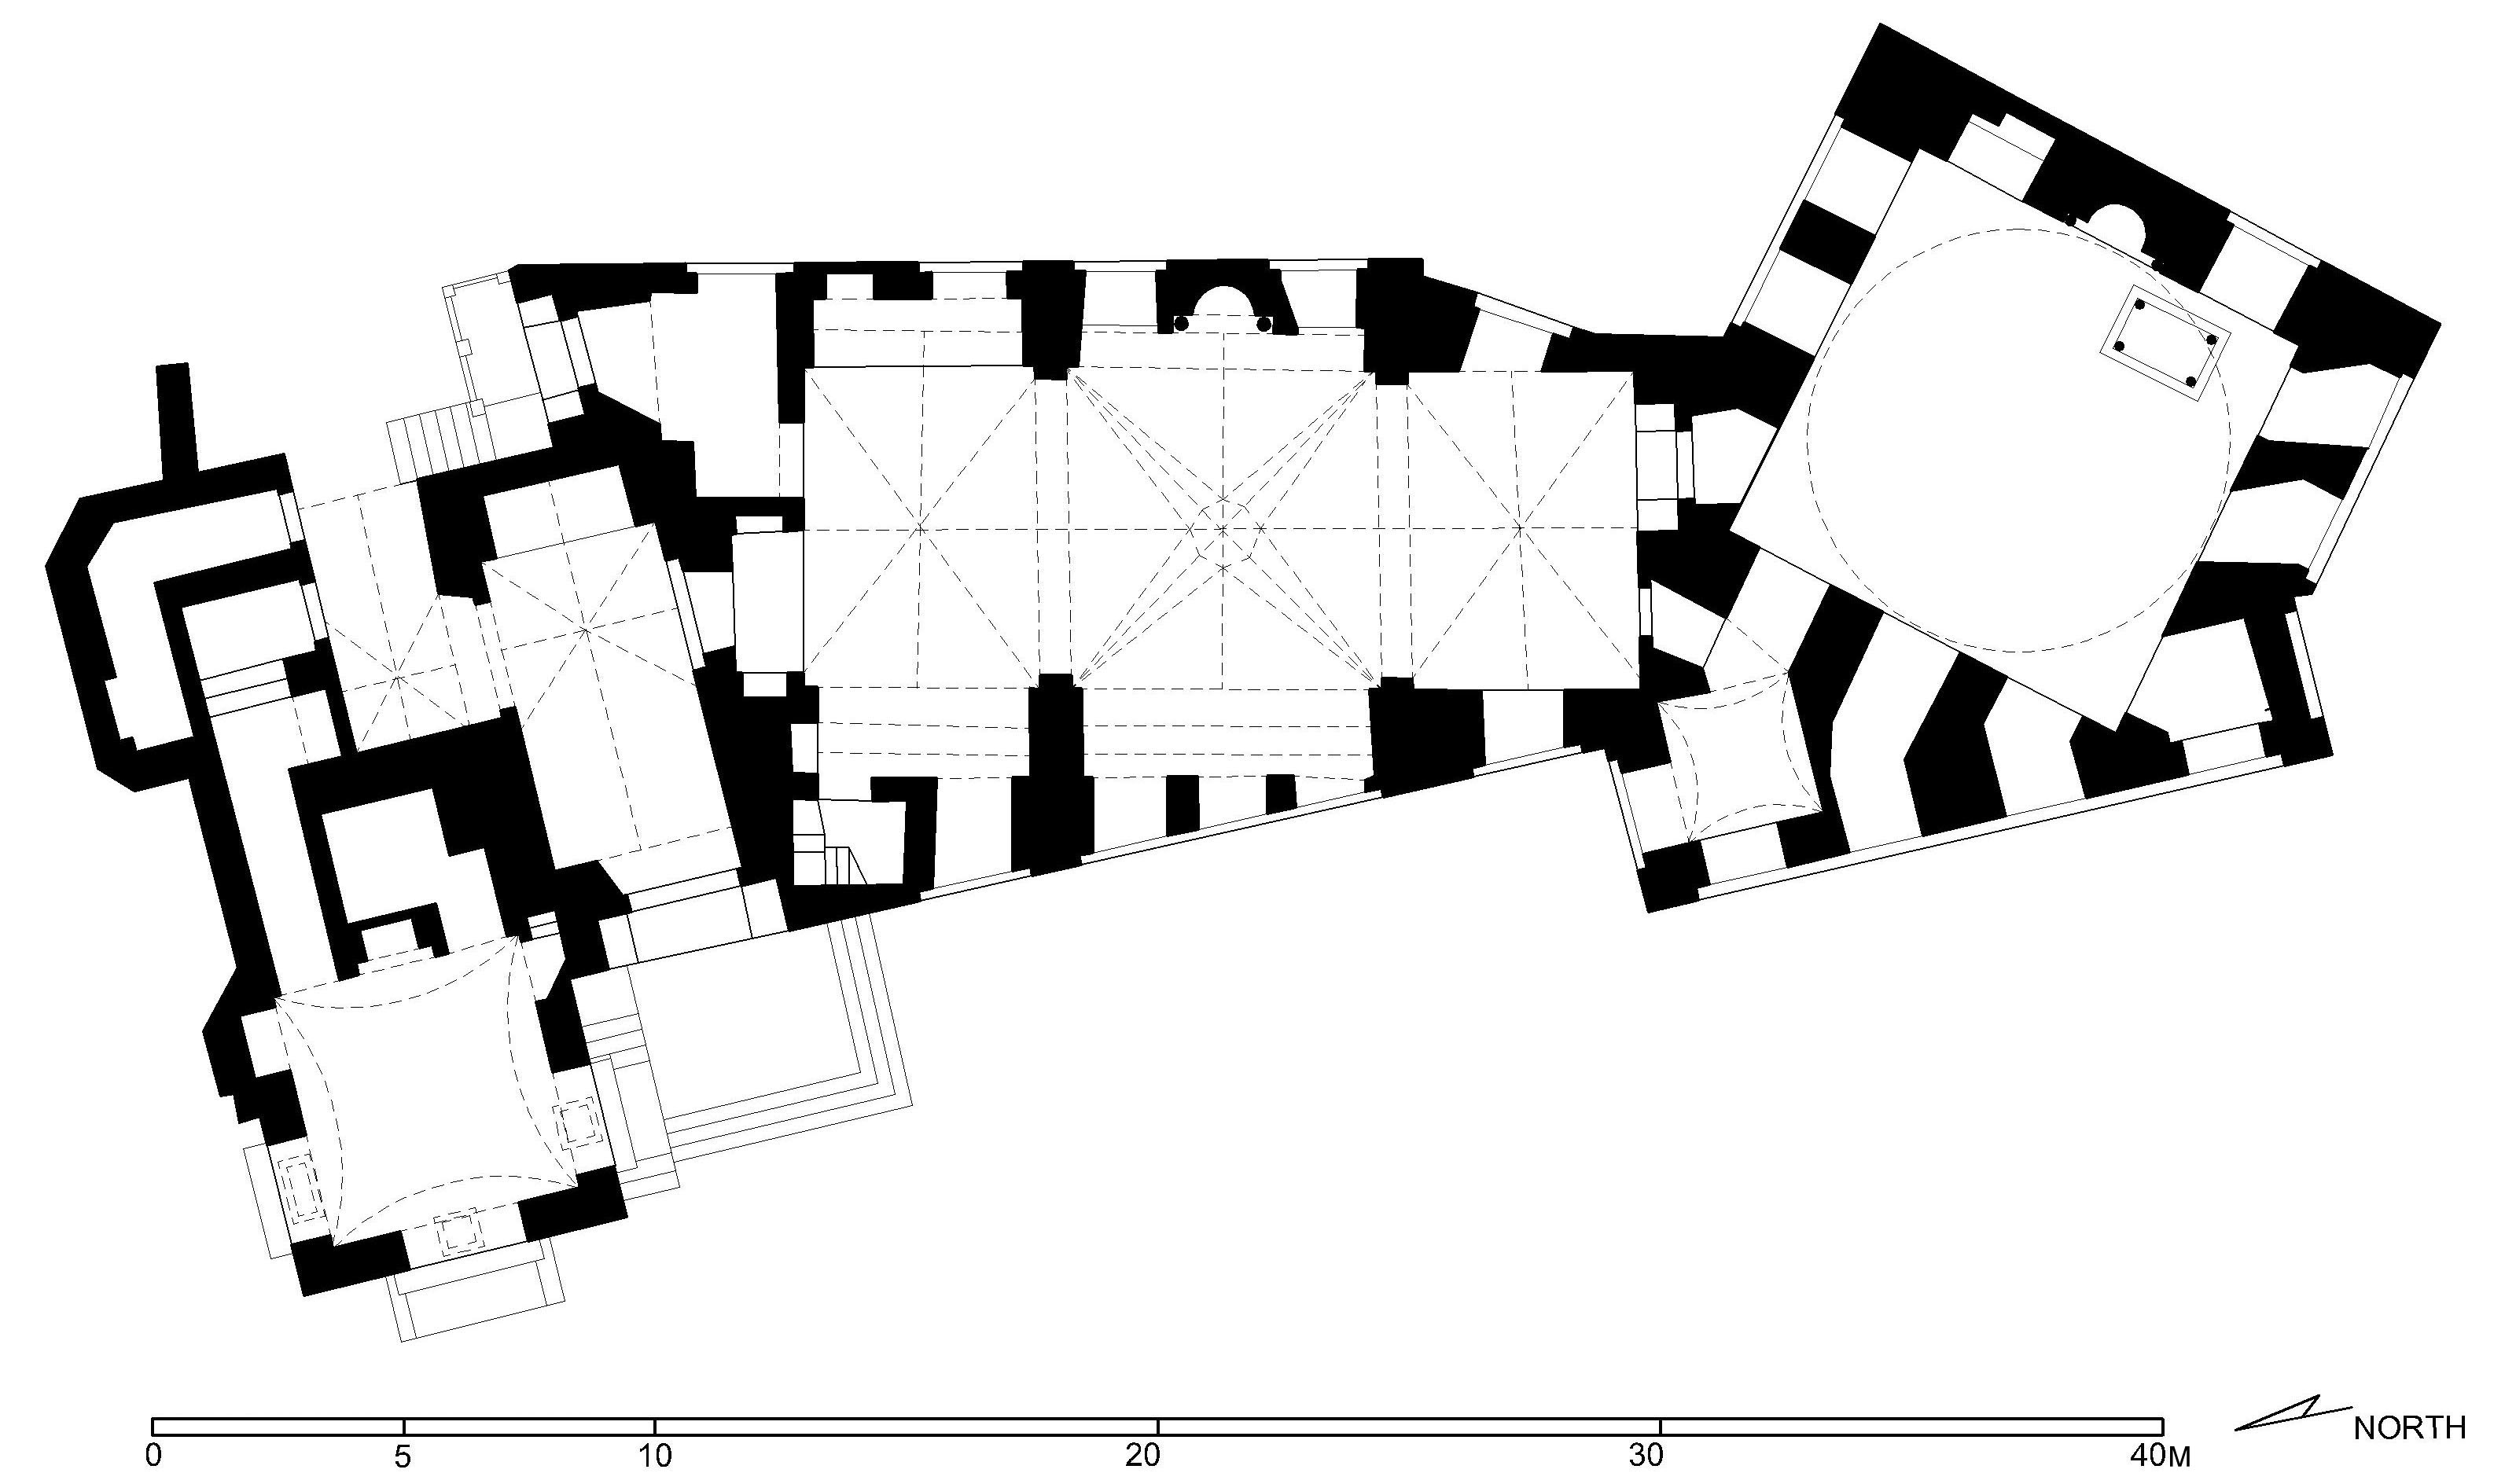 Masjid Khayrbak - Floor plan of funerary complex (after Meinecke) in AutoCAD 2000 format. Click the download button to download a zipped file containing the .dwg file. 